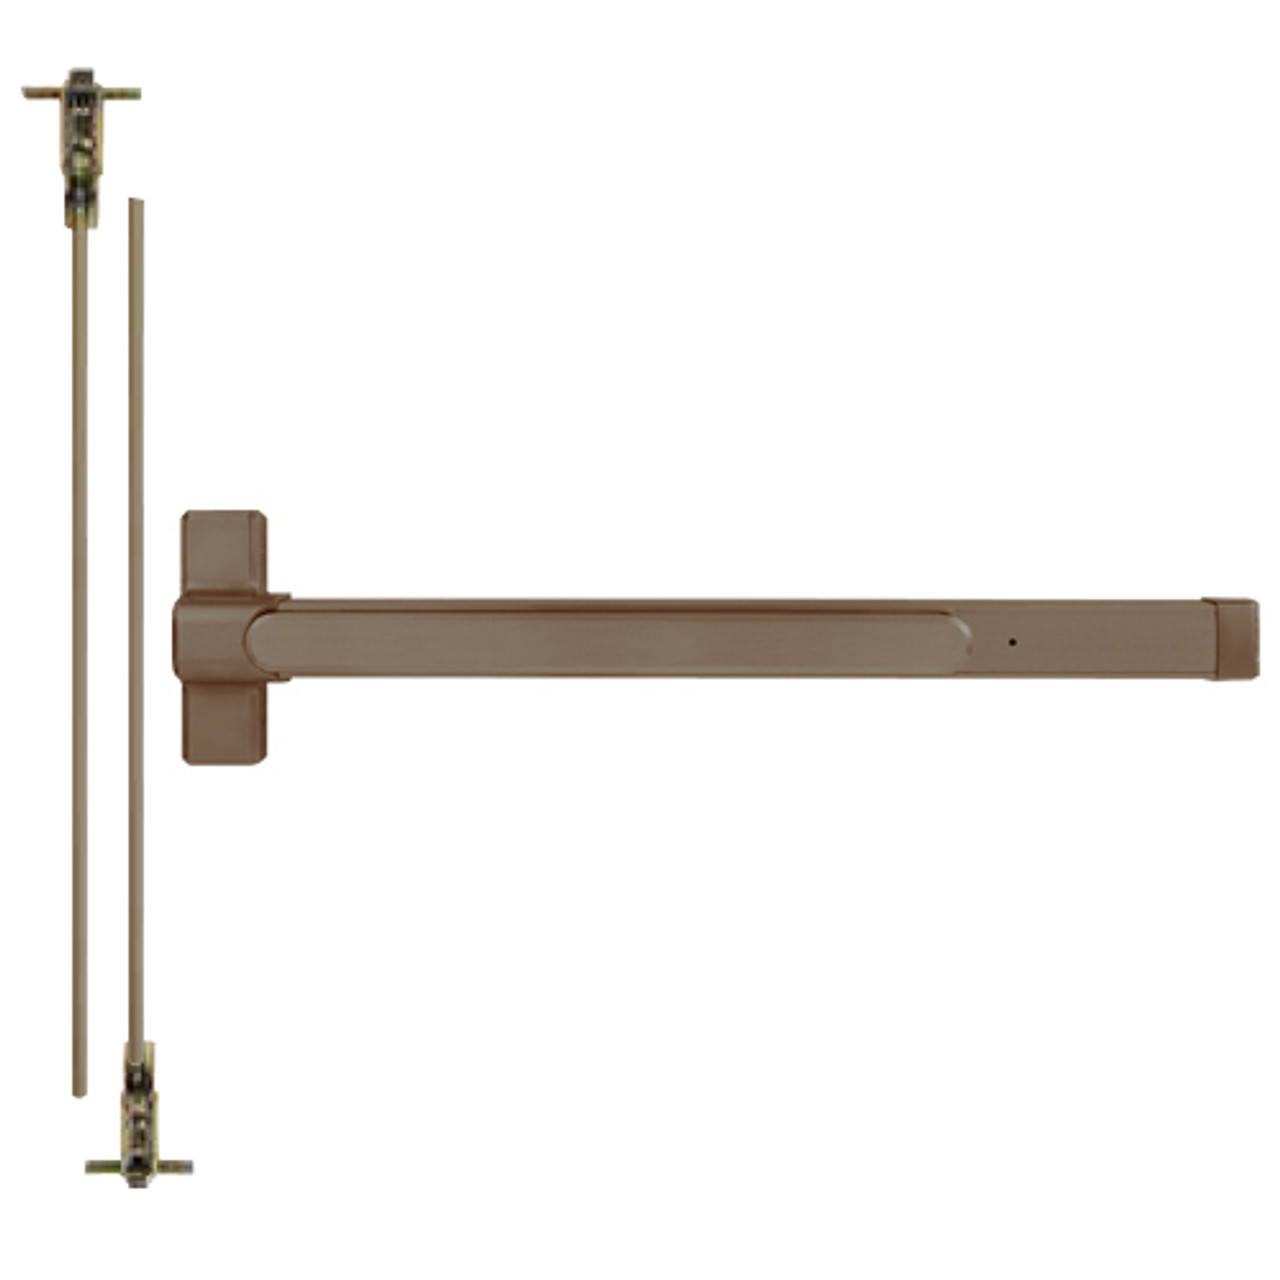 QED126X-36-8-313AN Stanley QED100 Series Heavy Duty Concealed Vertical Rod Fire Rated Exit Device in Anodized Duranodic Bronze Finish